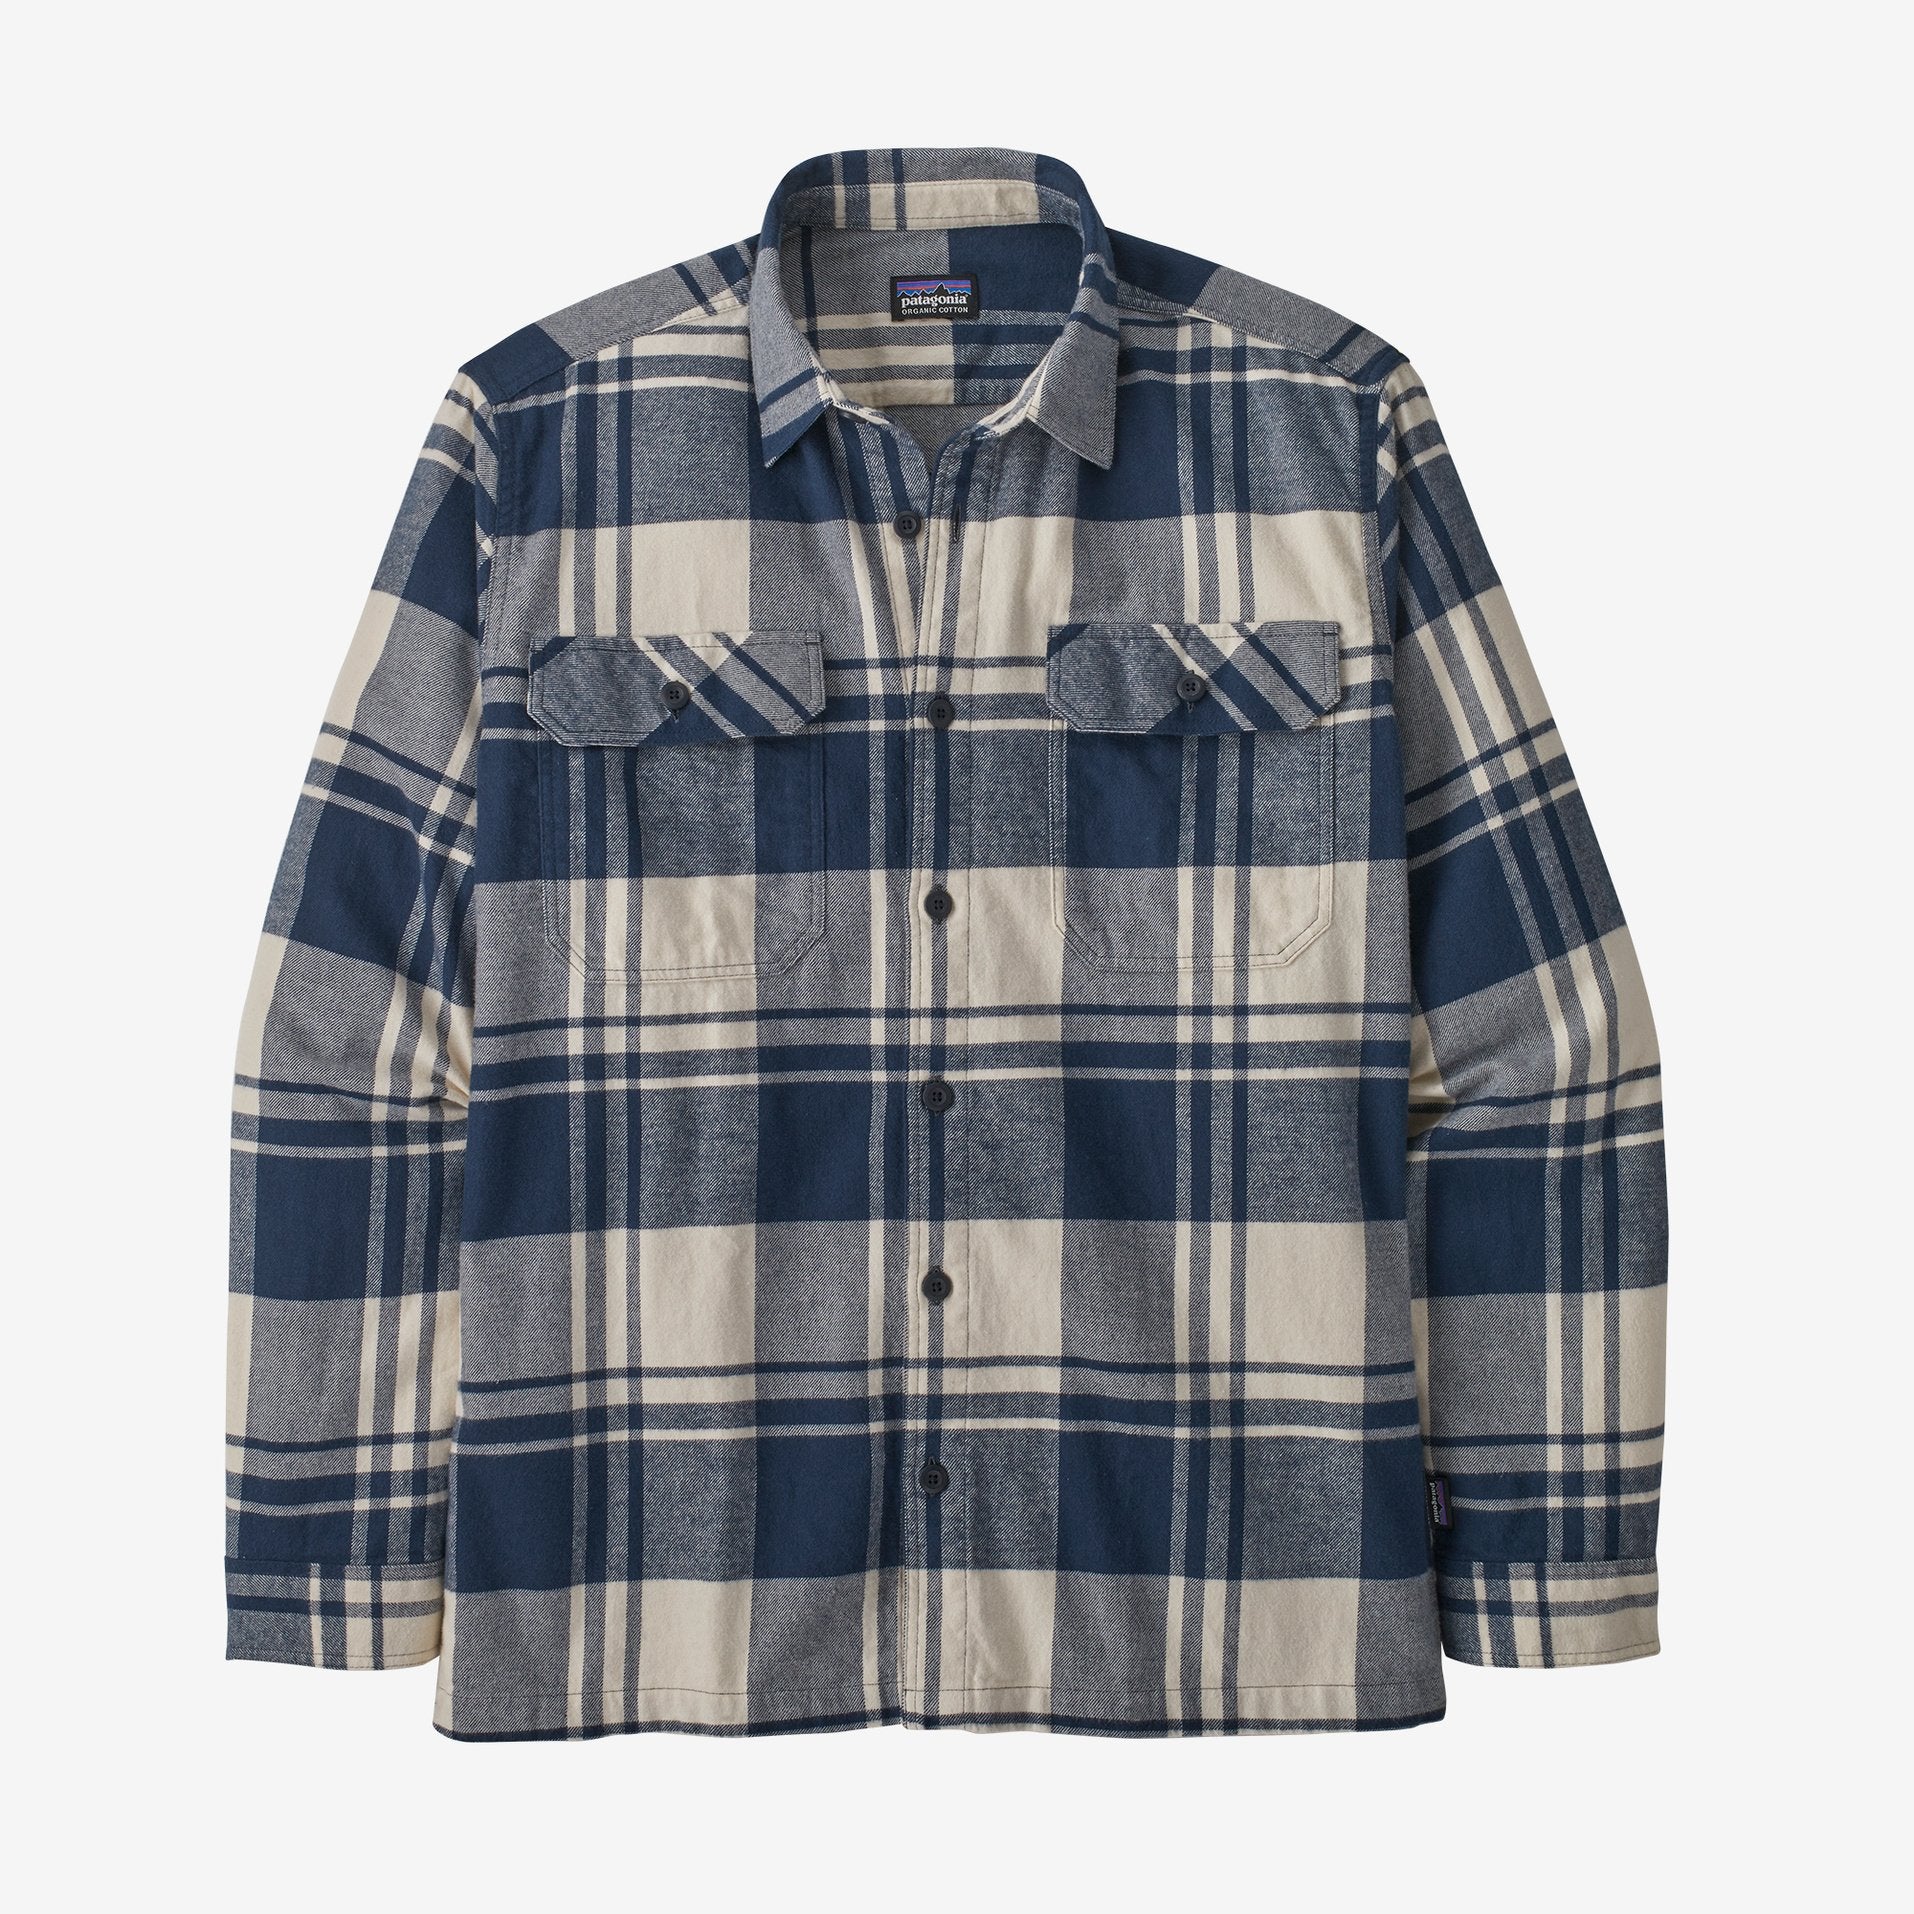 Patagonia M's Fjord flannel